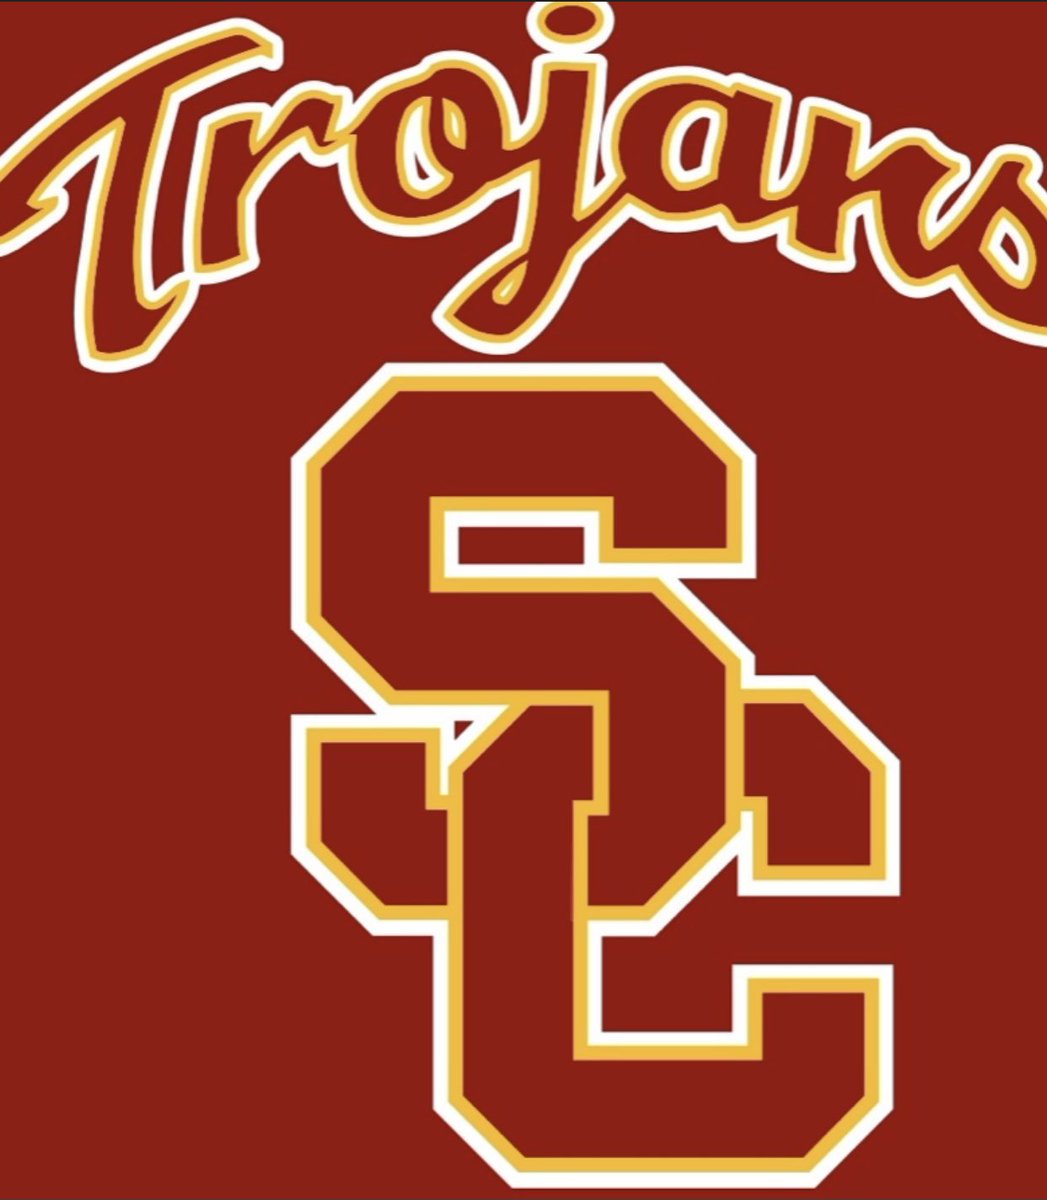 Blessed to receive an offer from USC